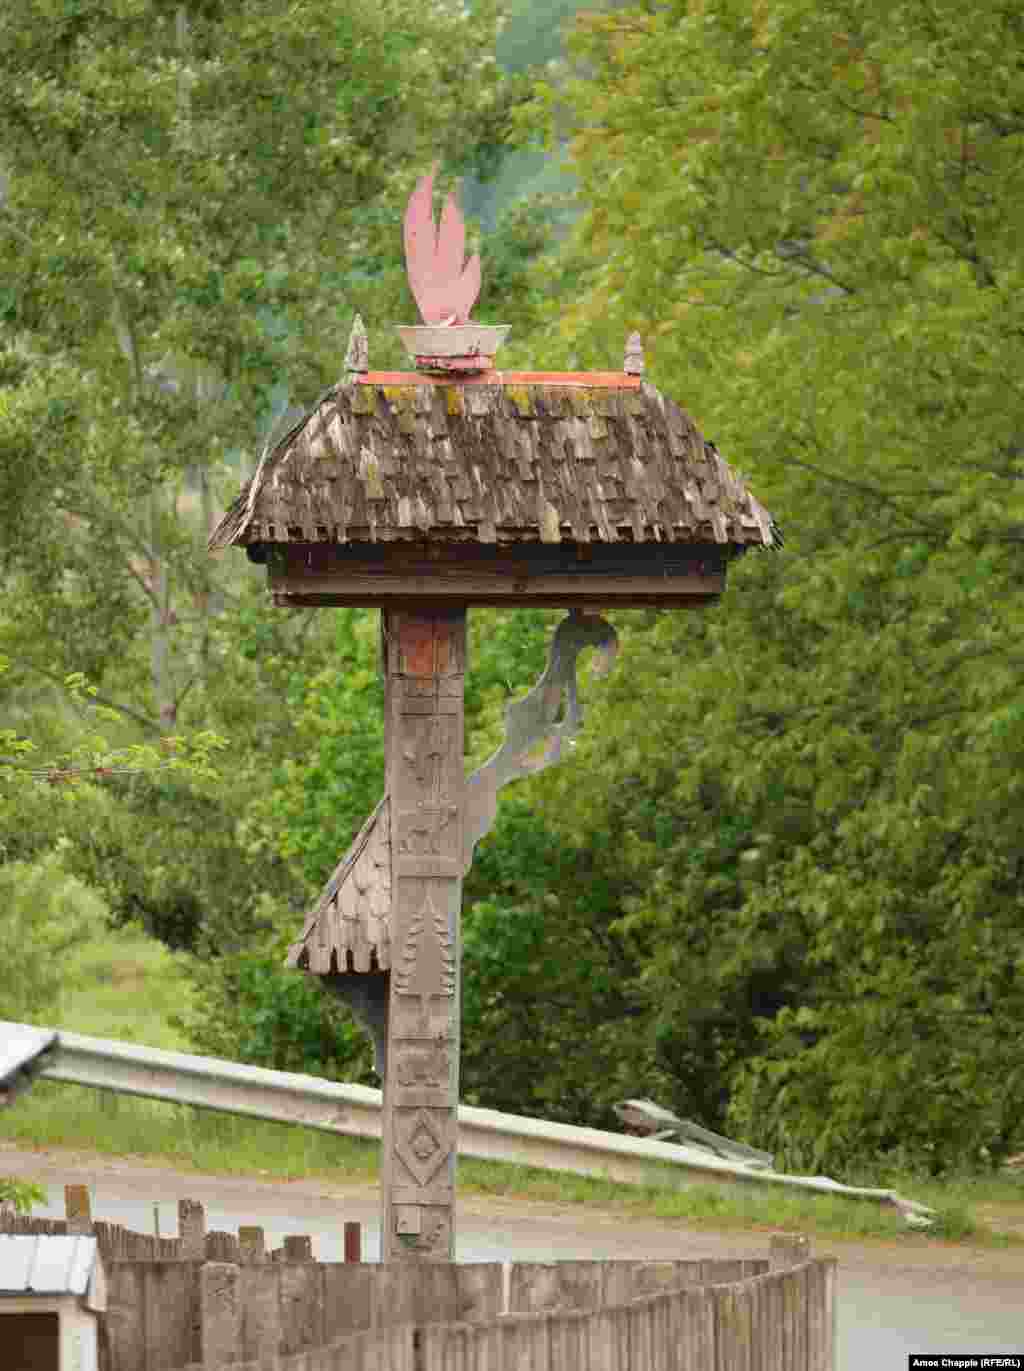 A flame is depicted at the entrance to&nbsp;Andreiasu de Jos village.&nbsp; Local media reported that in Andreiasu de Jos, where access to Romania&#39;s living fires is easiest, visitors to the flames were declining in recent years. One local expressed hope that &quot;something can be done for this area so that it does not fall into anonymity.&quot; &nbsp;